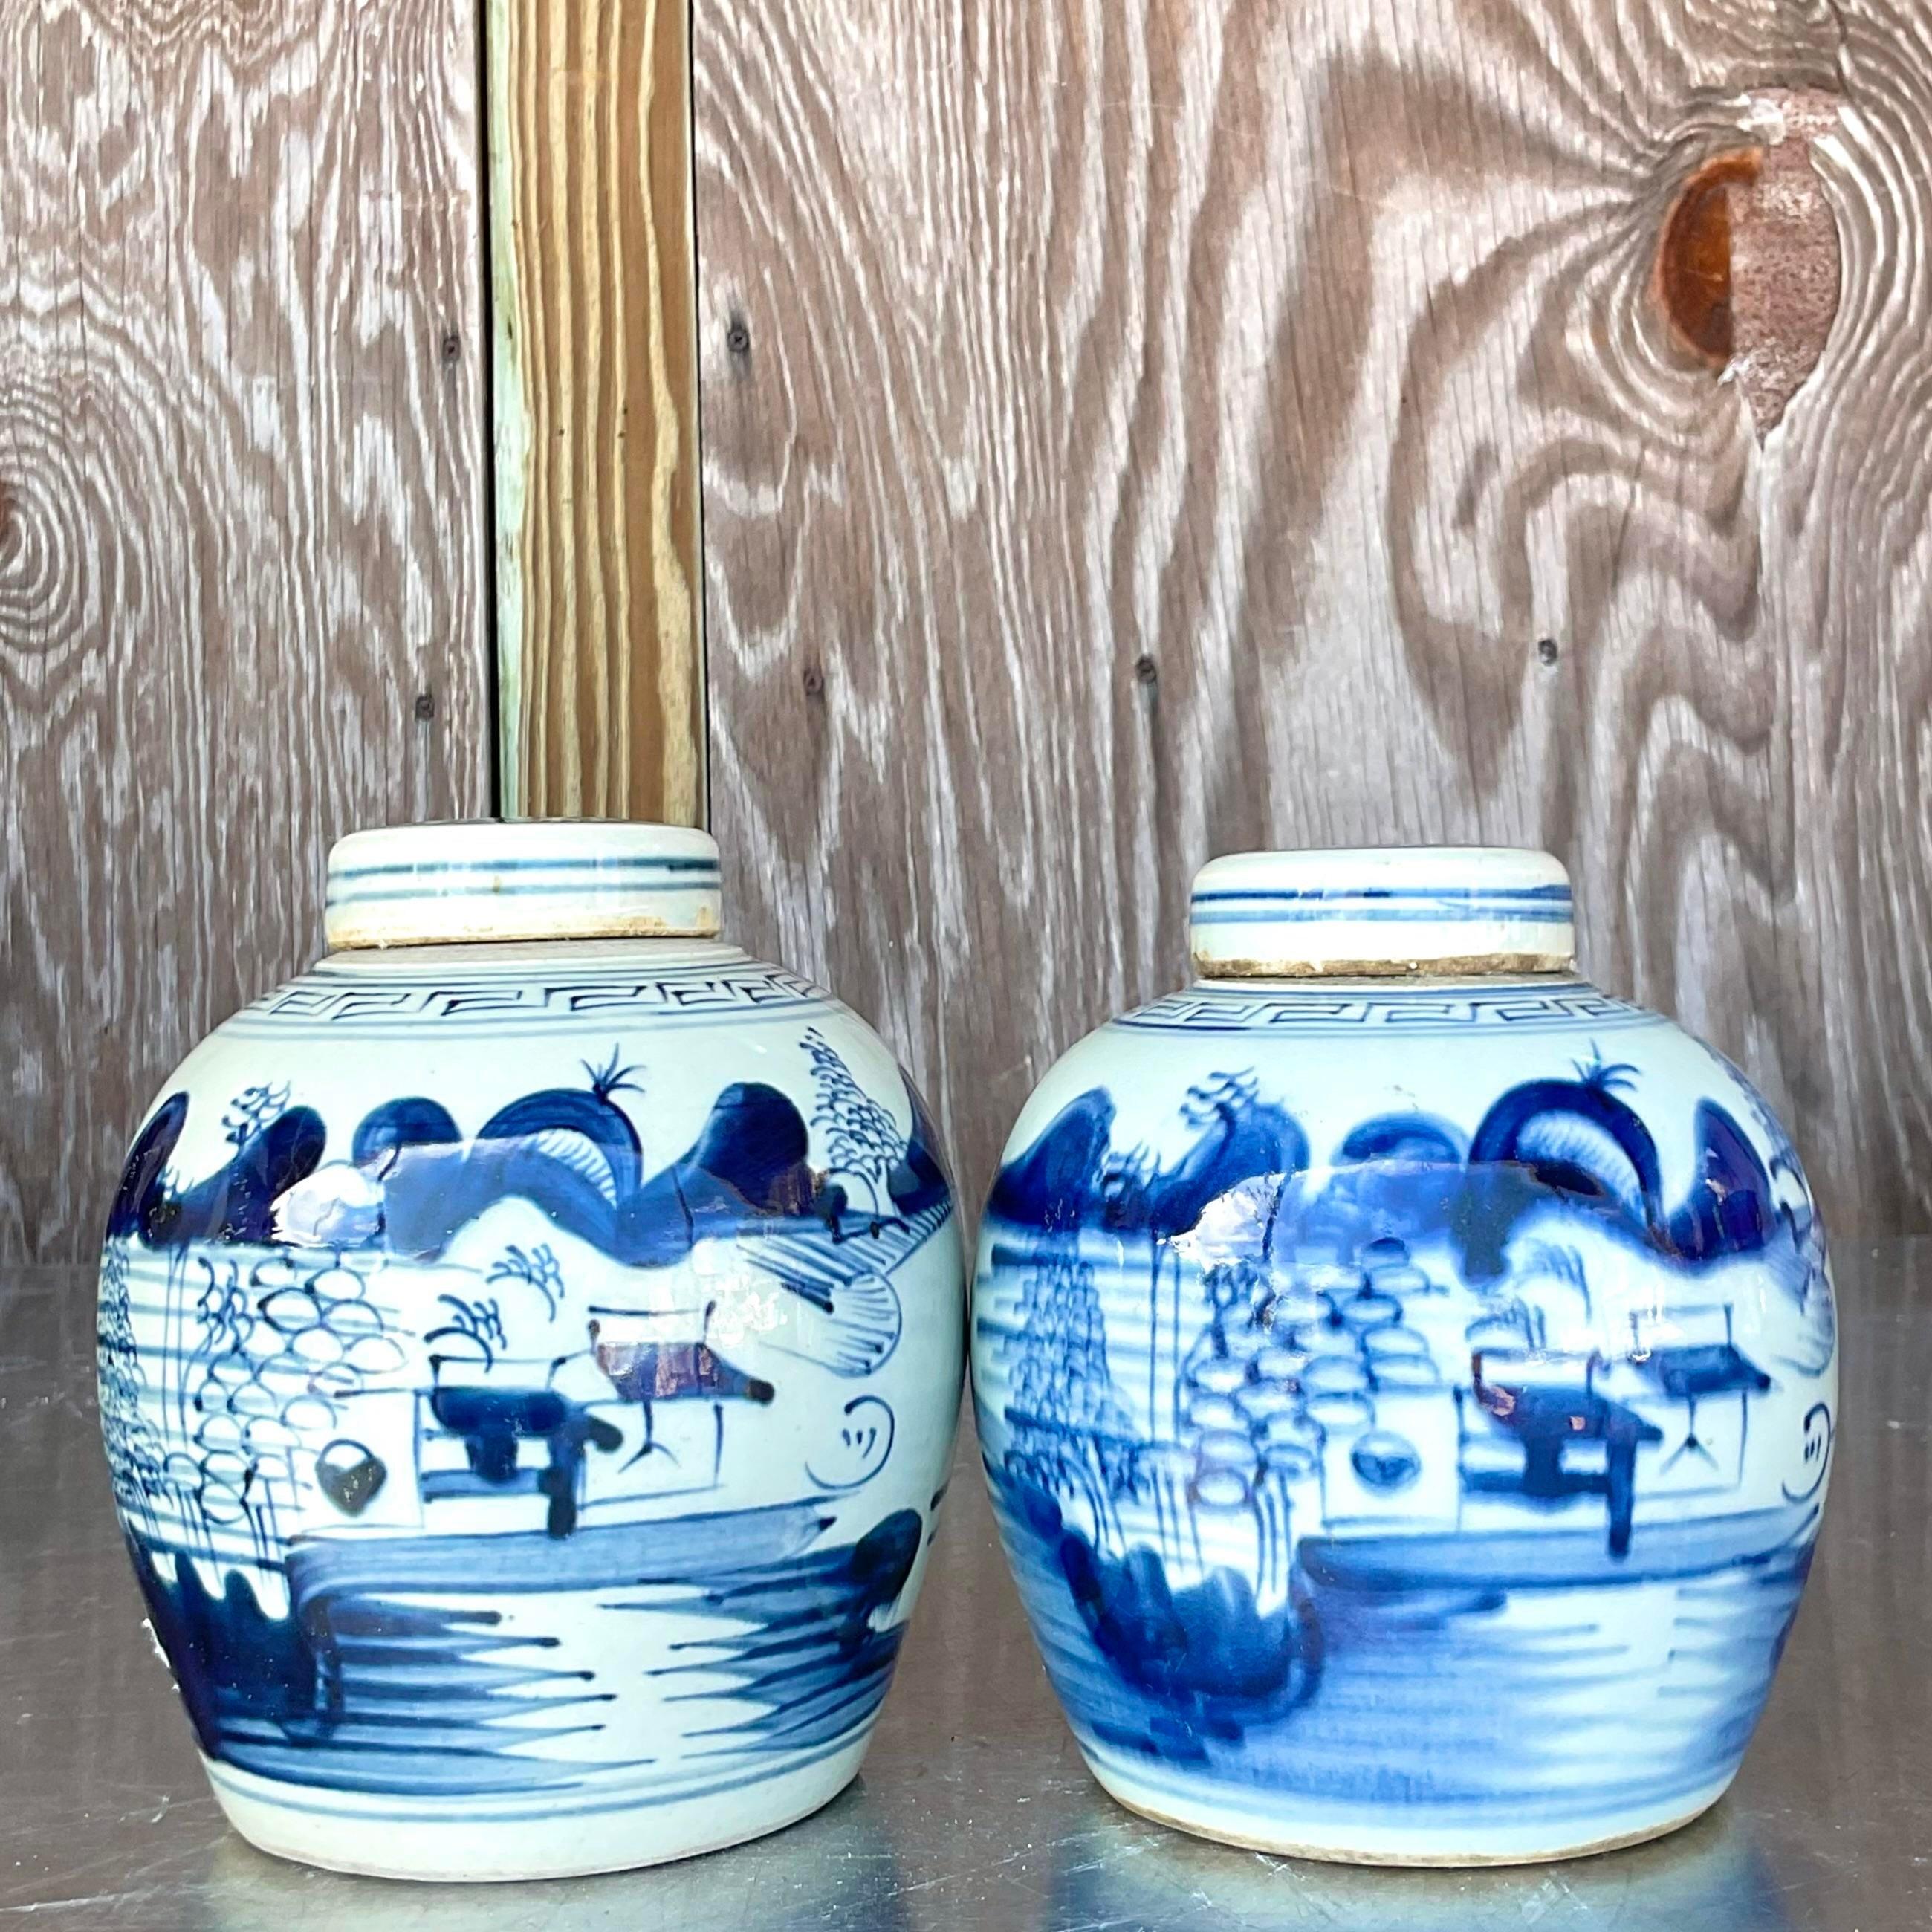 Bohemian Vintage Asian Petite Blue and White Lidded Jars - Set of 2 For Sale